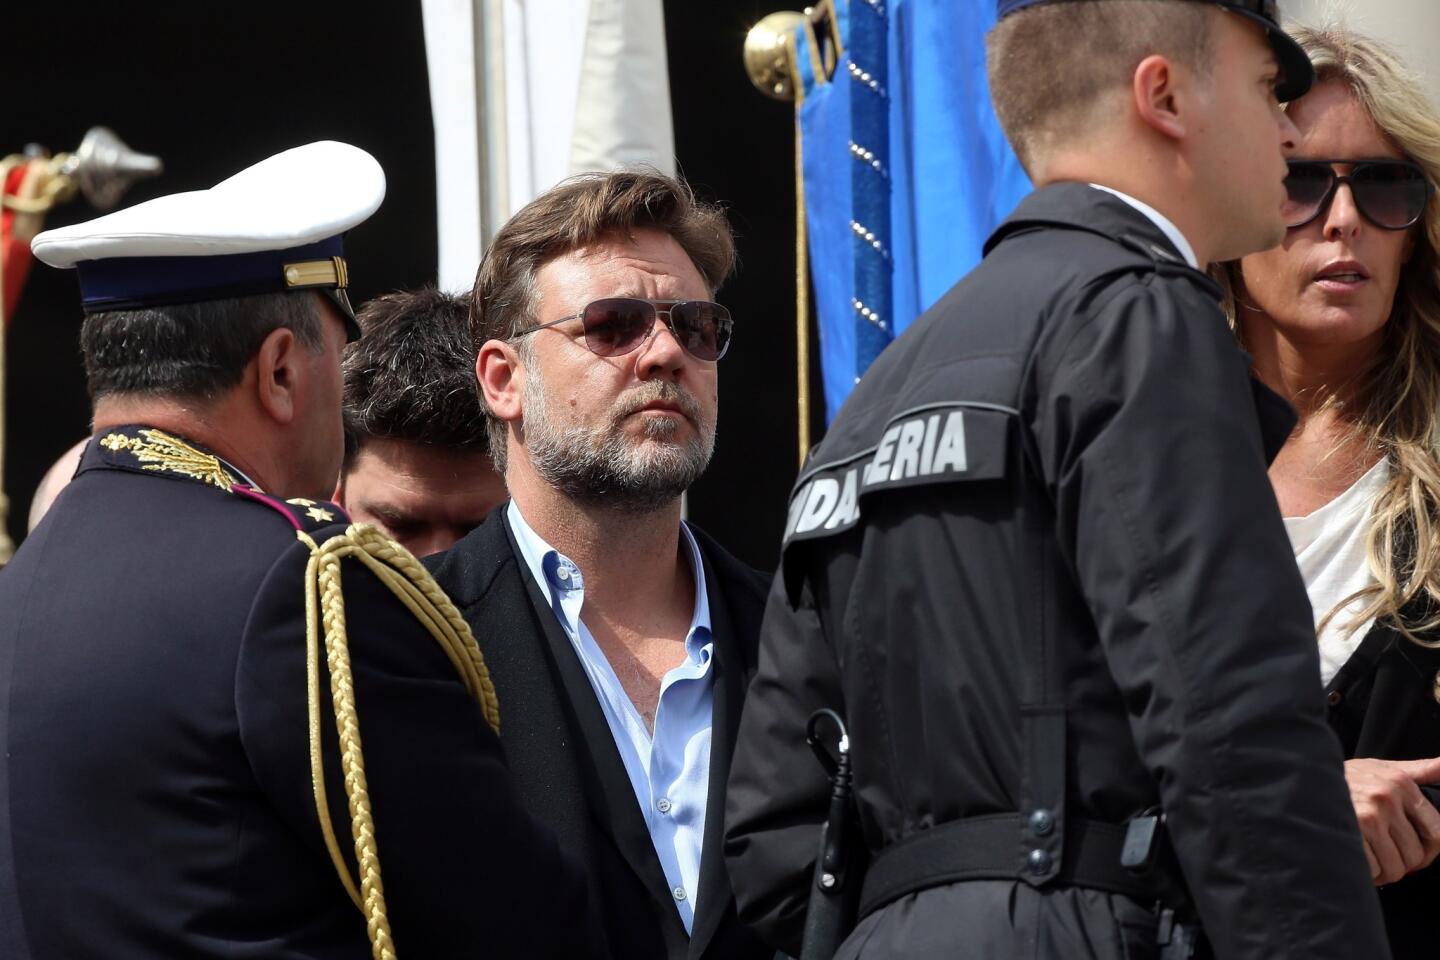 Russell Crowe visits Pope Francis